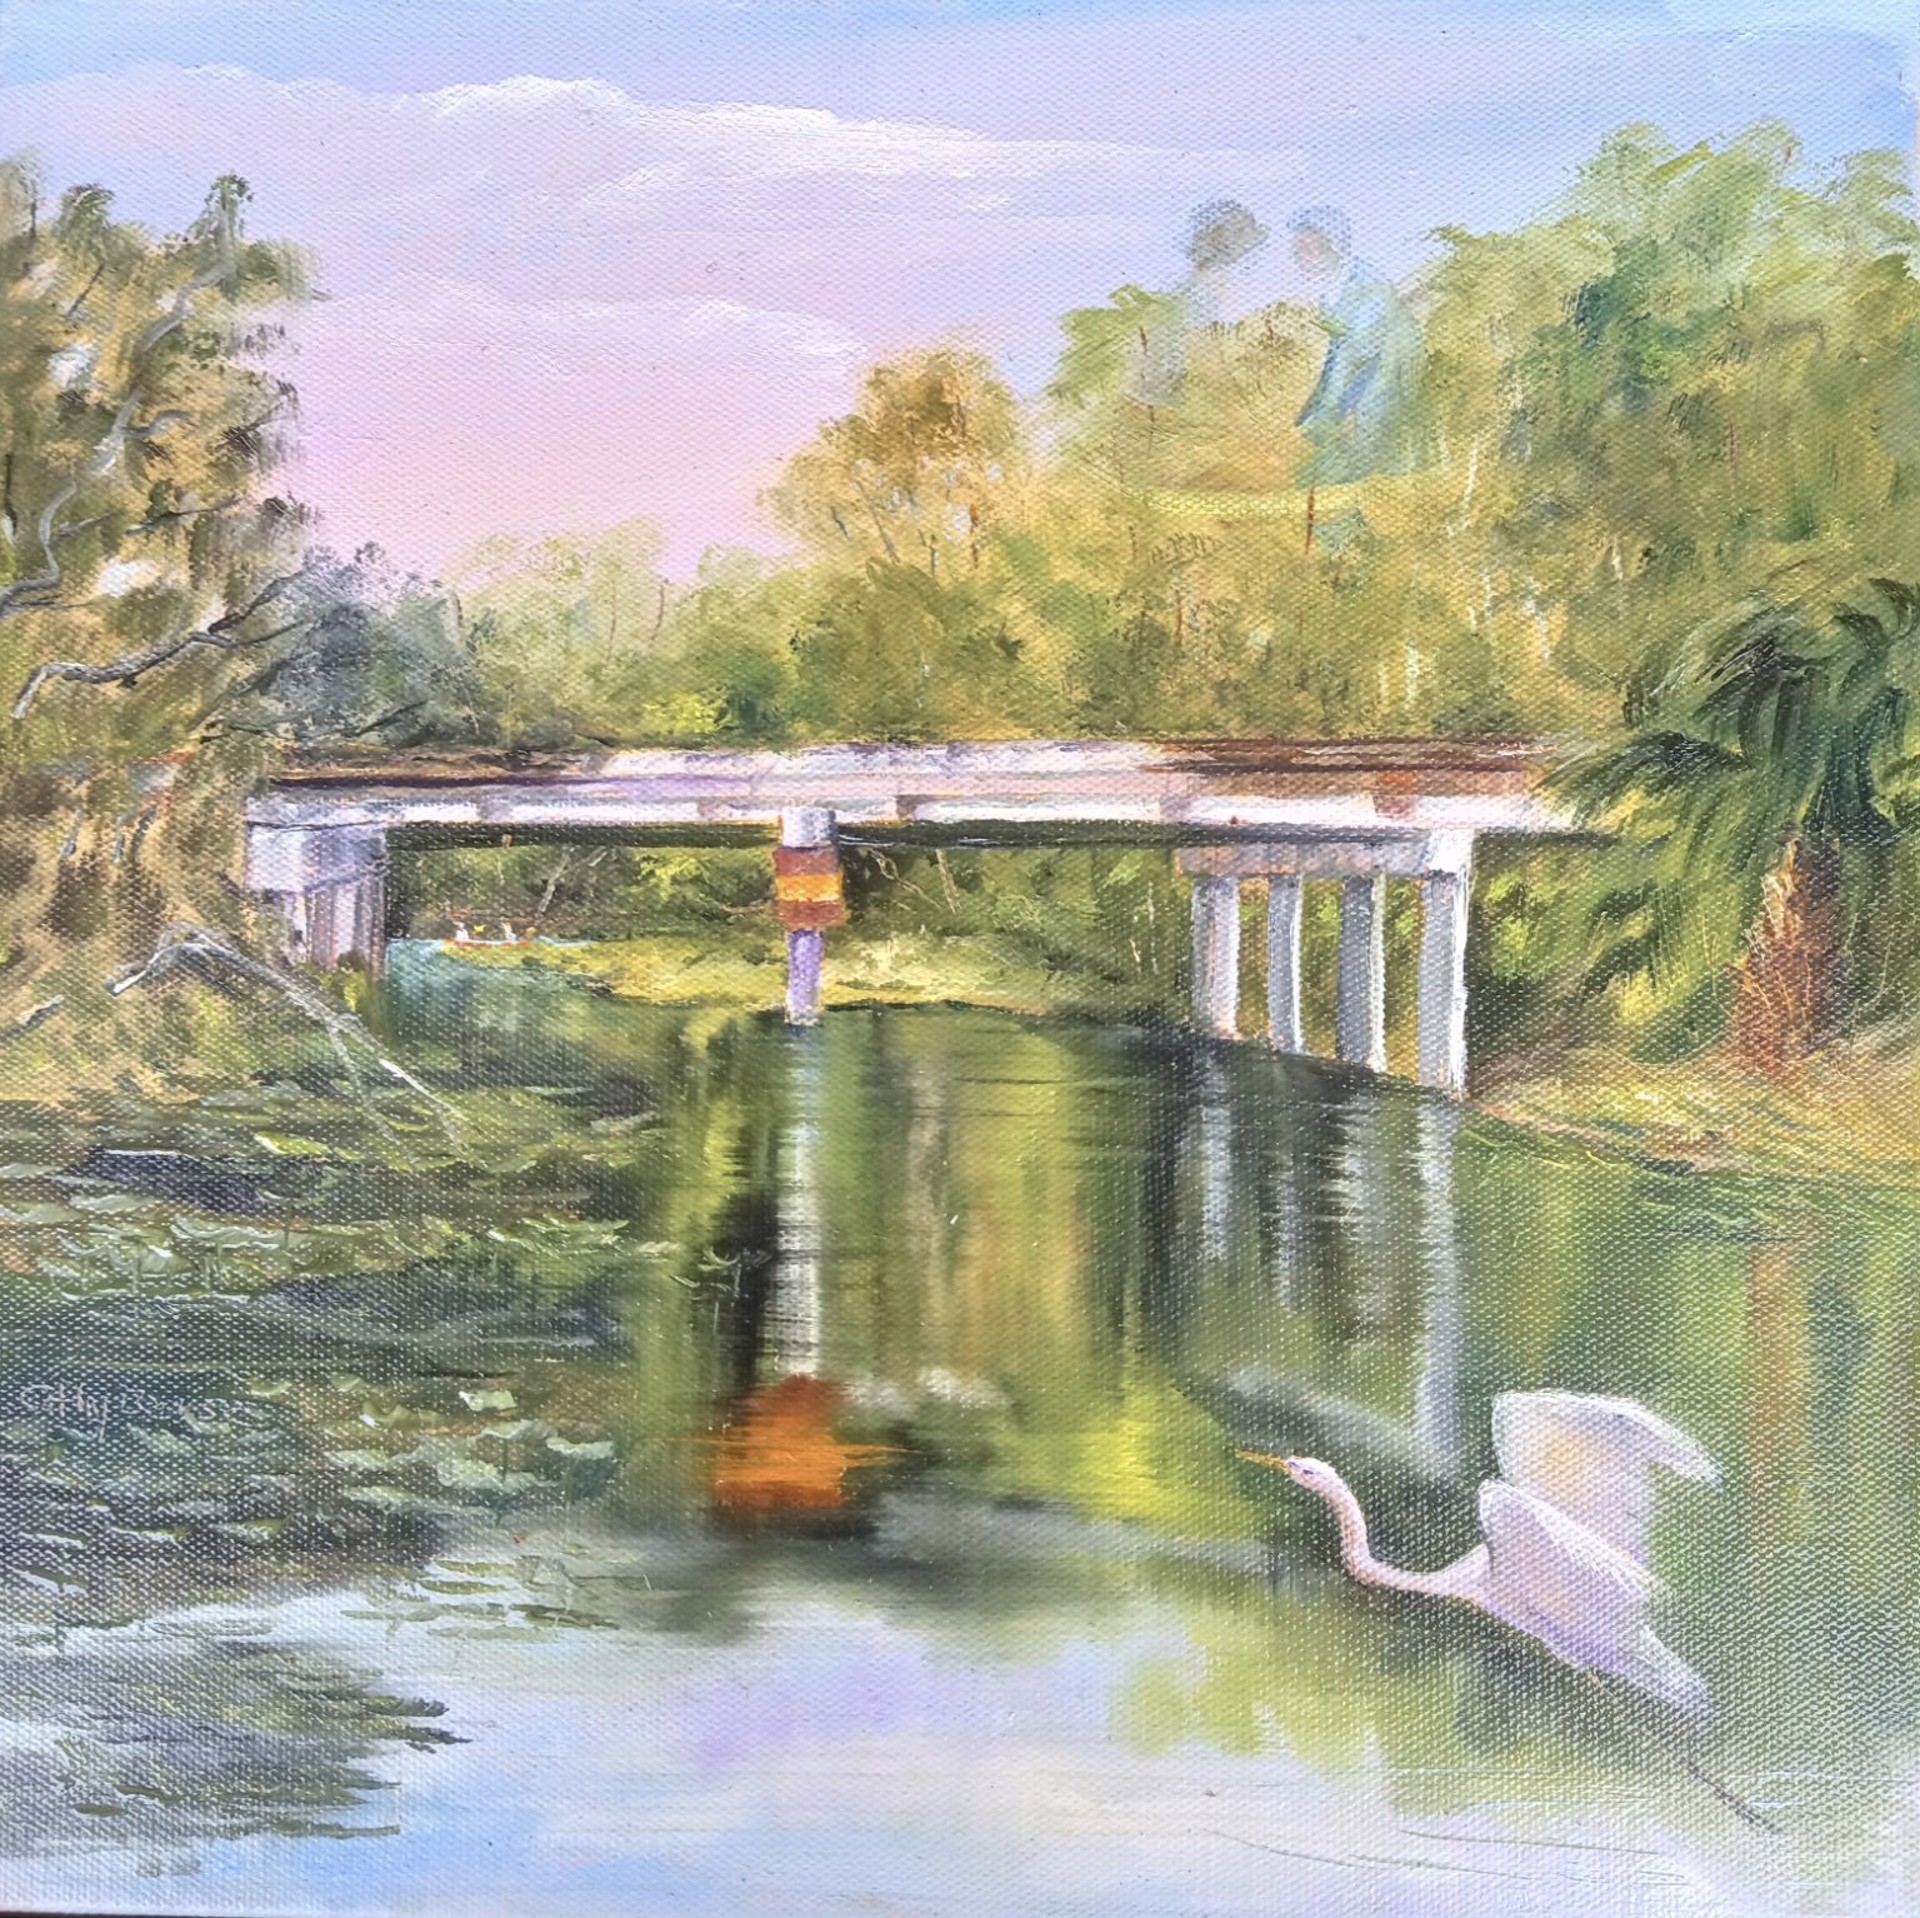 Spirited Amore Bridge - SOLD by Cathy Berse